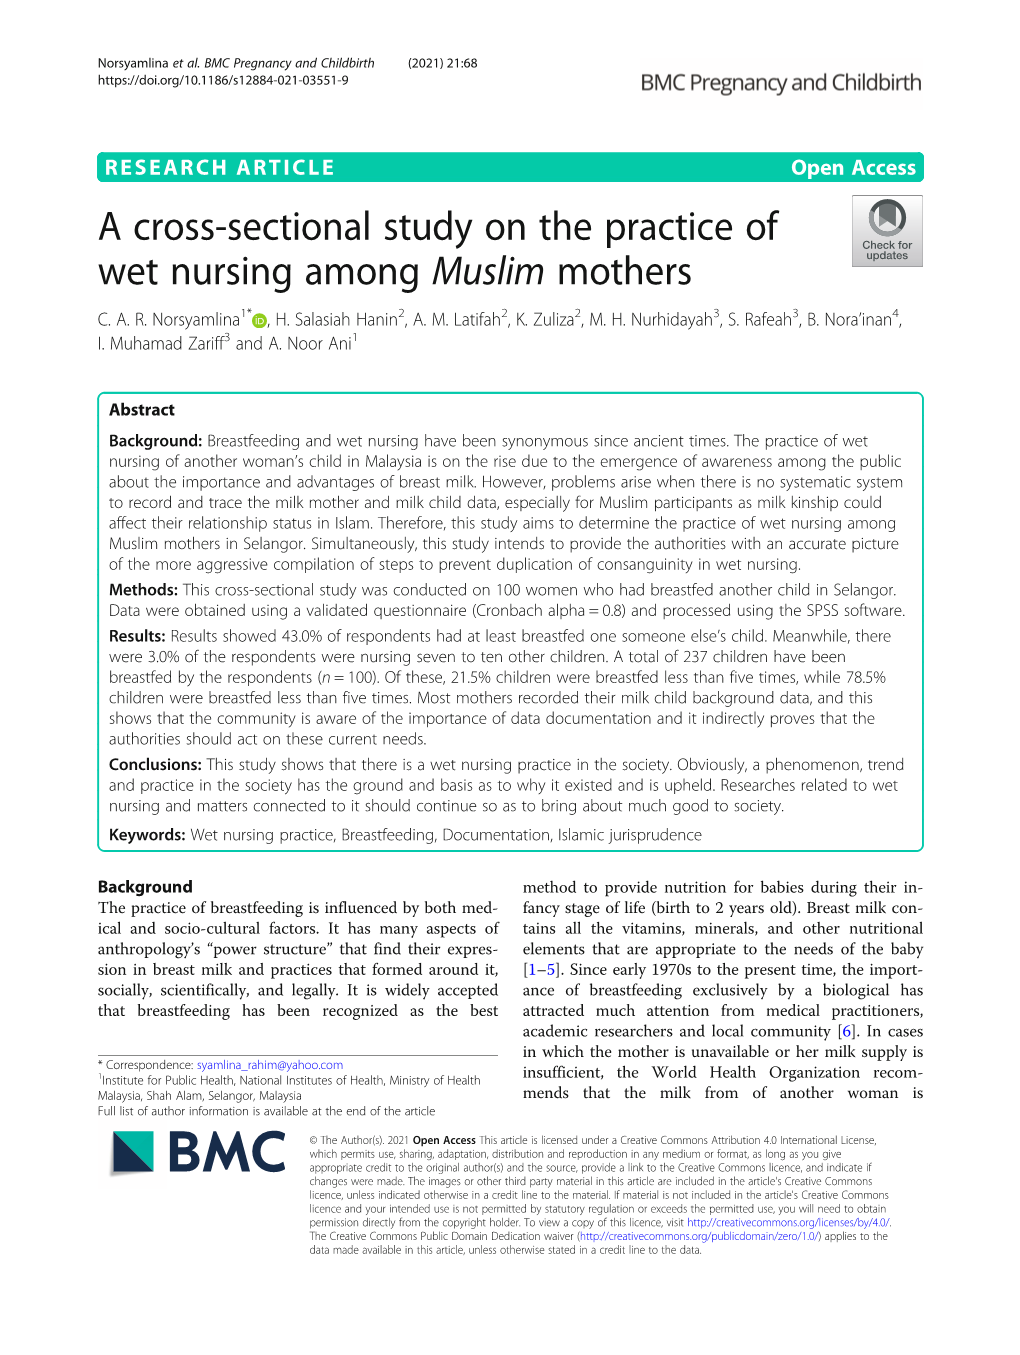 A Cross-Sectional Study on the Practice of Wet Nursing Among Muslim Mothers C